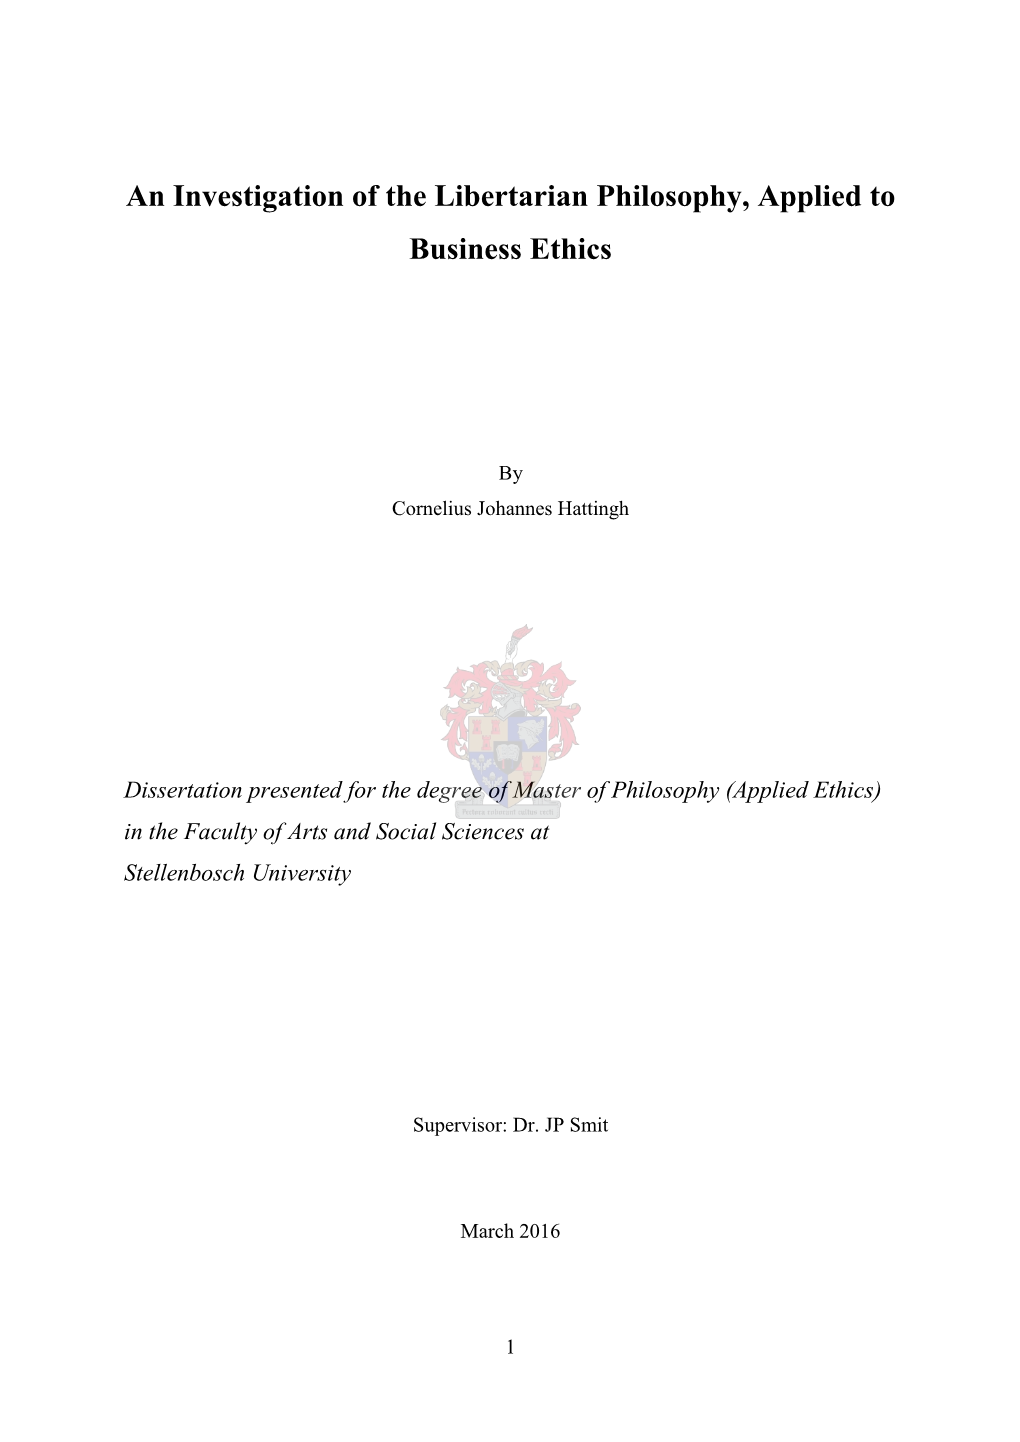 An Investigation of the Libertarian Philosophy, Applied to Business Ethics